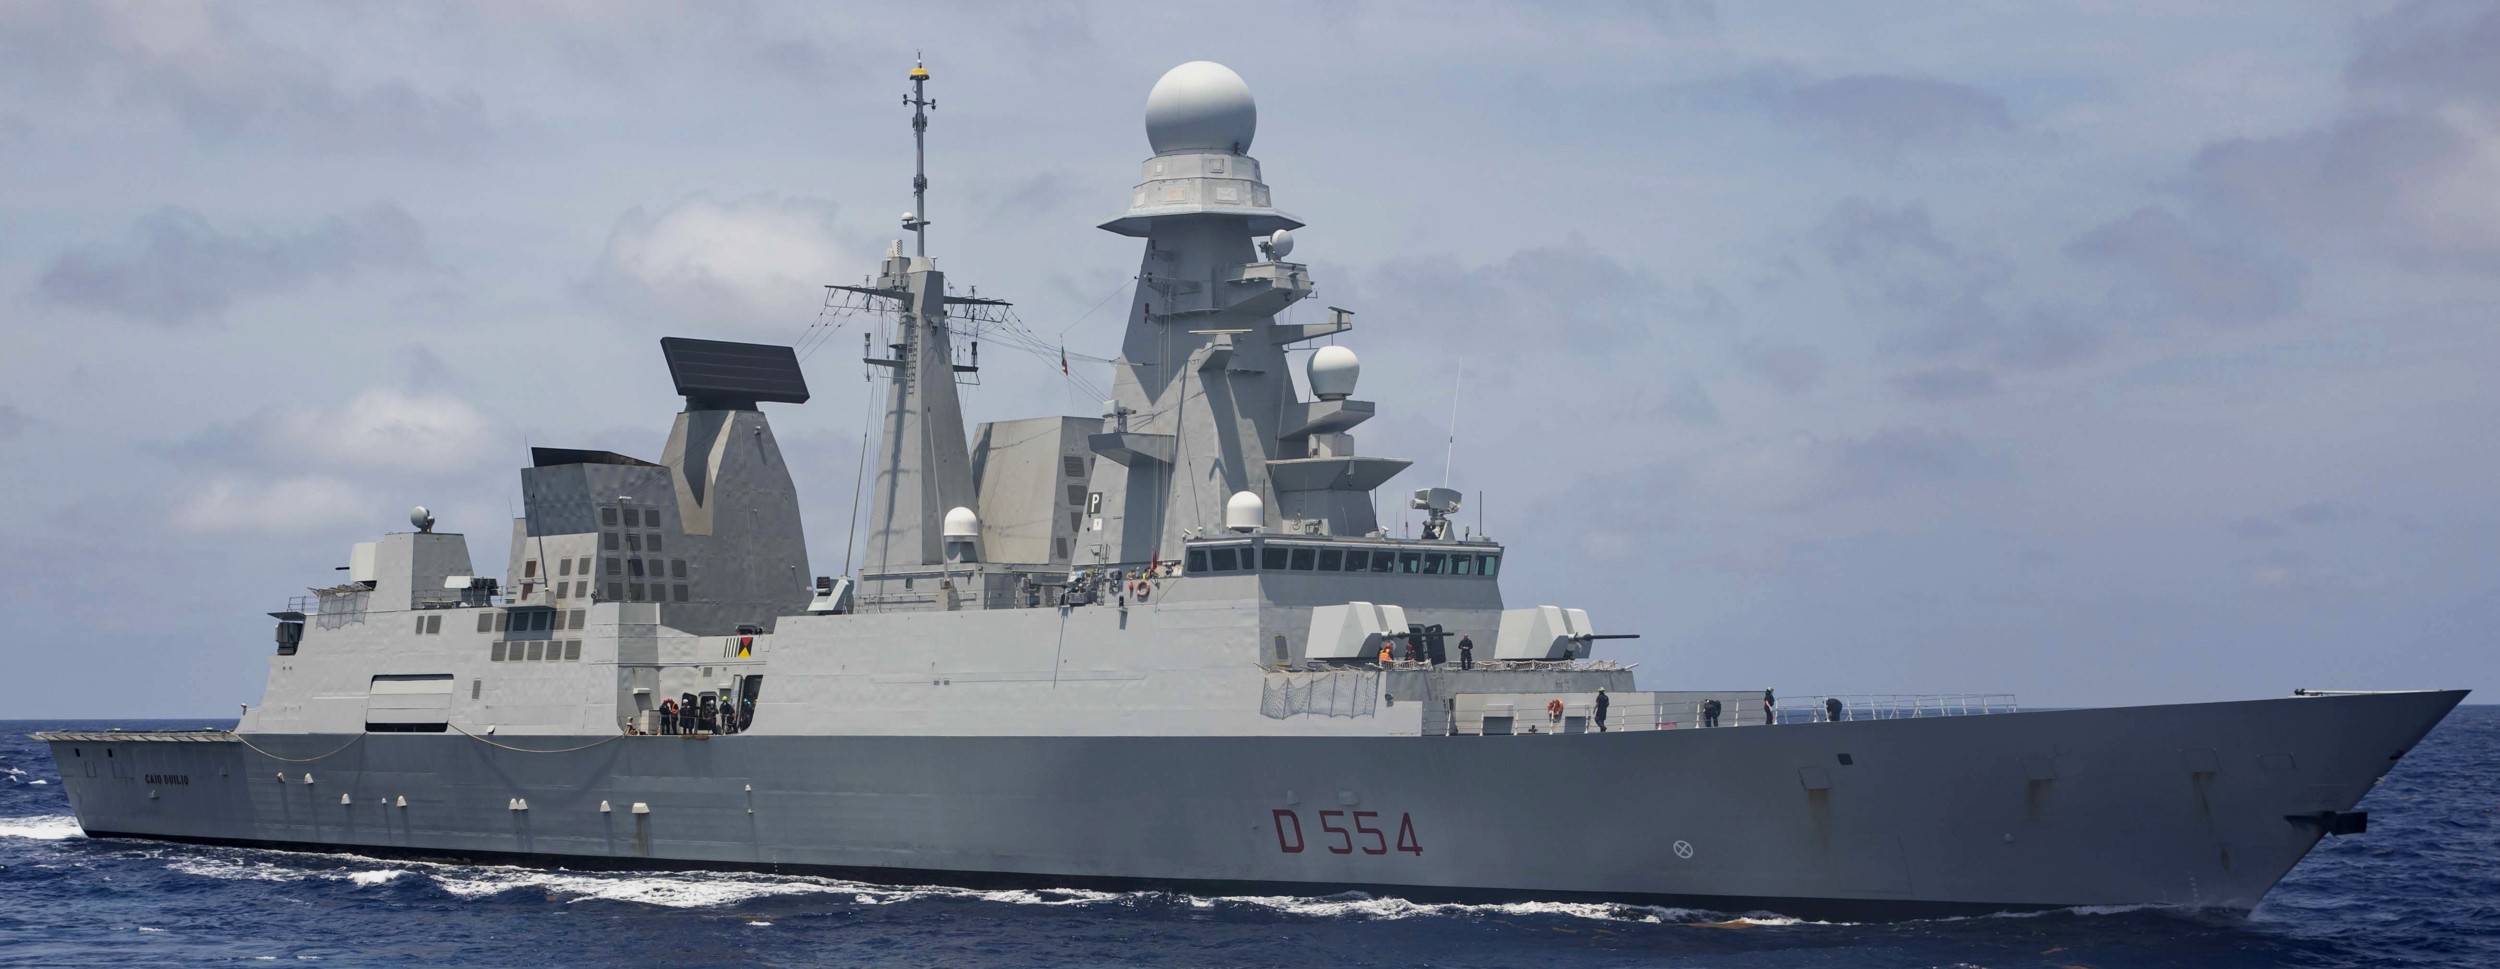 d-554 caio duilio its nave horizon class guided missile destroyer ddgh italian navy marina militare 47